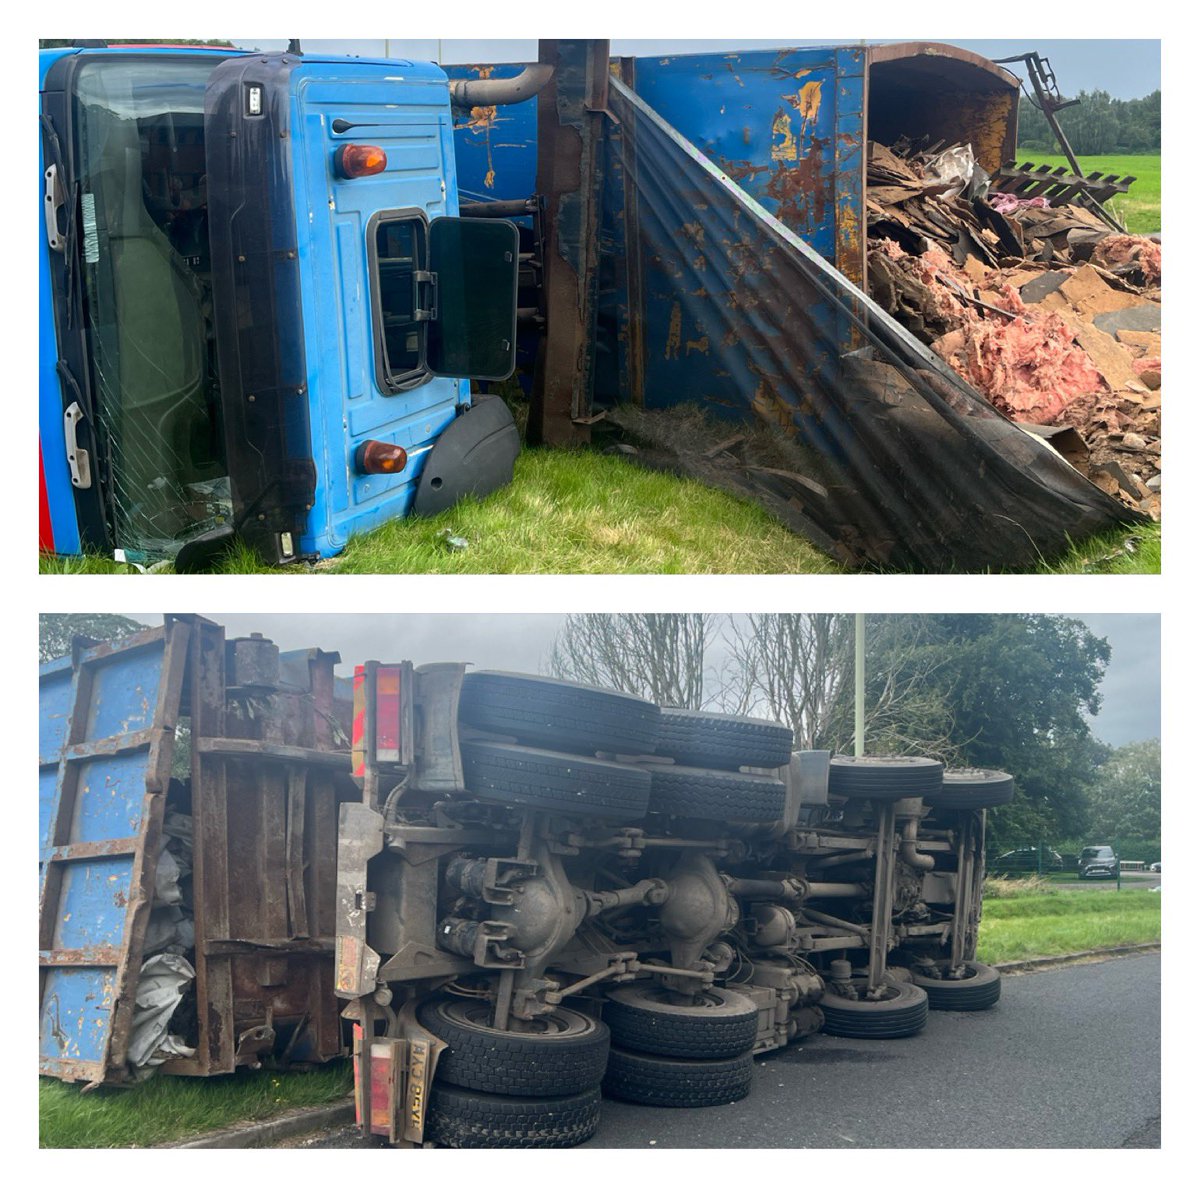 Team B in Telford with a lorry that turned over nr Hadley Park. Driver taken to hospital, road is open but awaiting recovery of vehicle. OR95